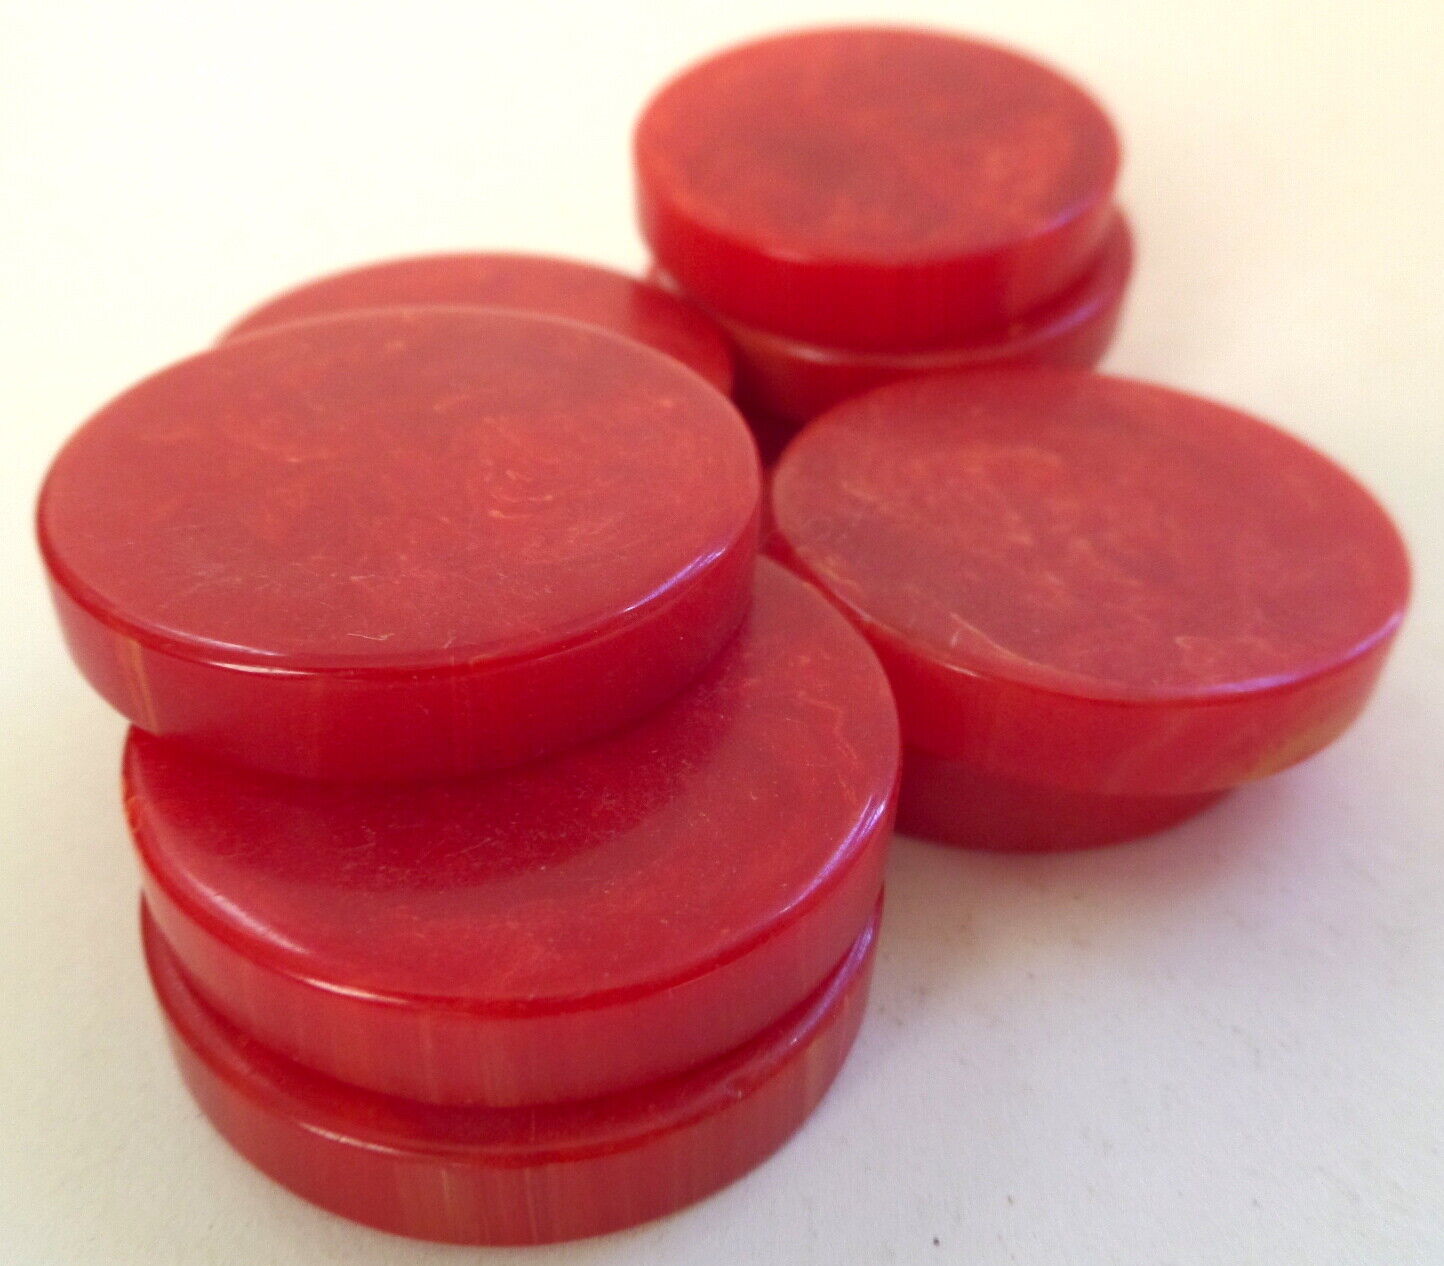 LOT 10 CATALIN Backgammon Red Marbeized 30mm x 5mm Thick (1.1/8 in) by Bakelite Без бренда - фотография #4